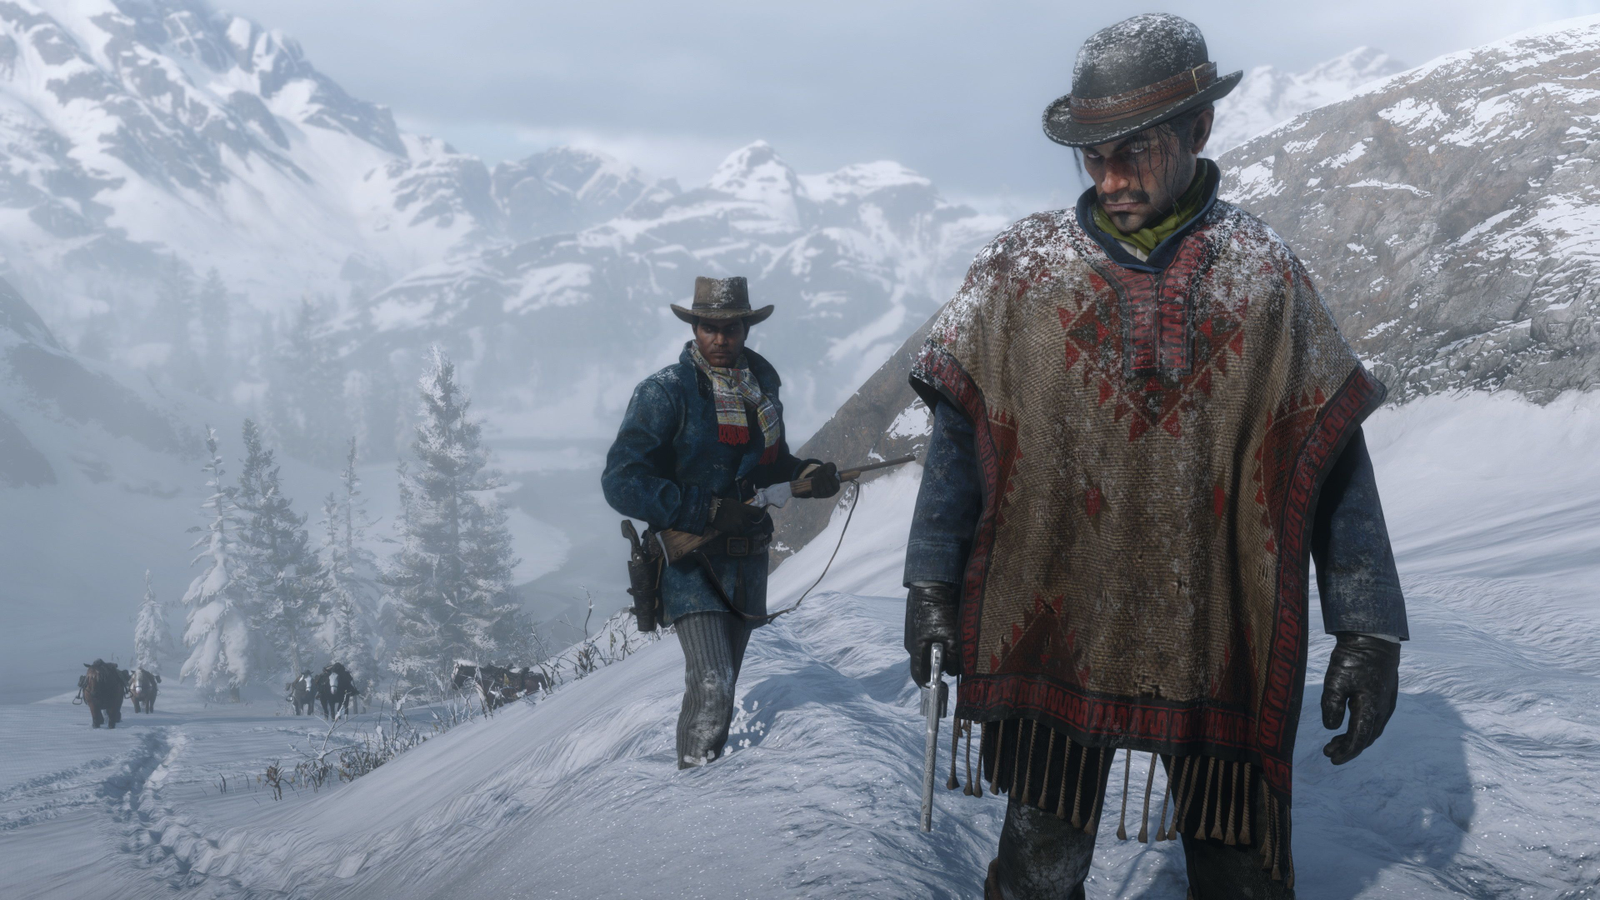 Red Dead Redemption 2 chapters: How many chapters are there?